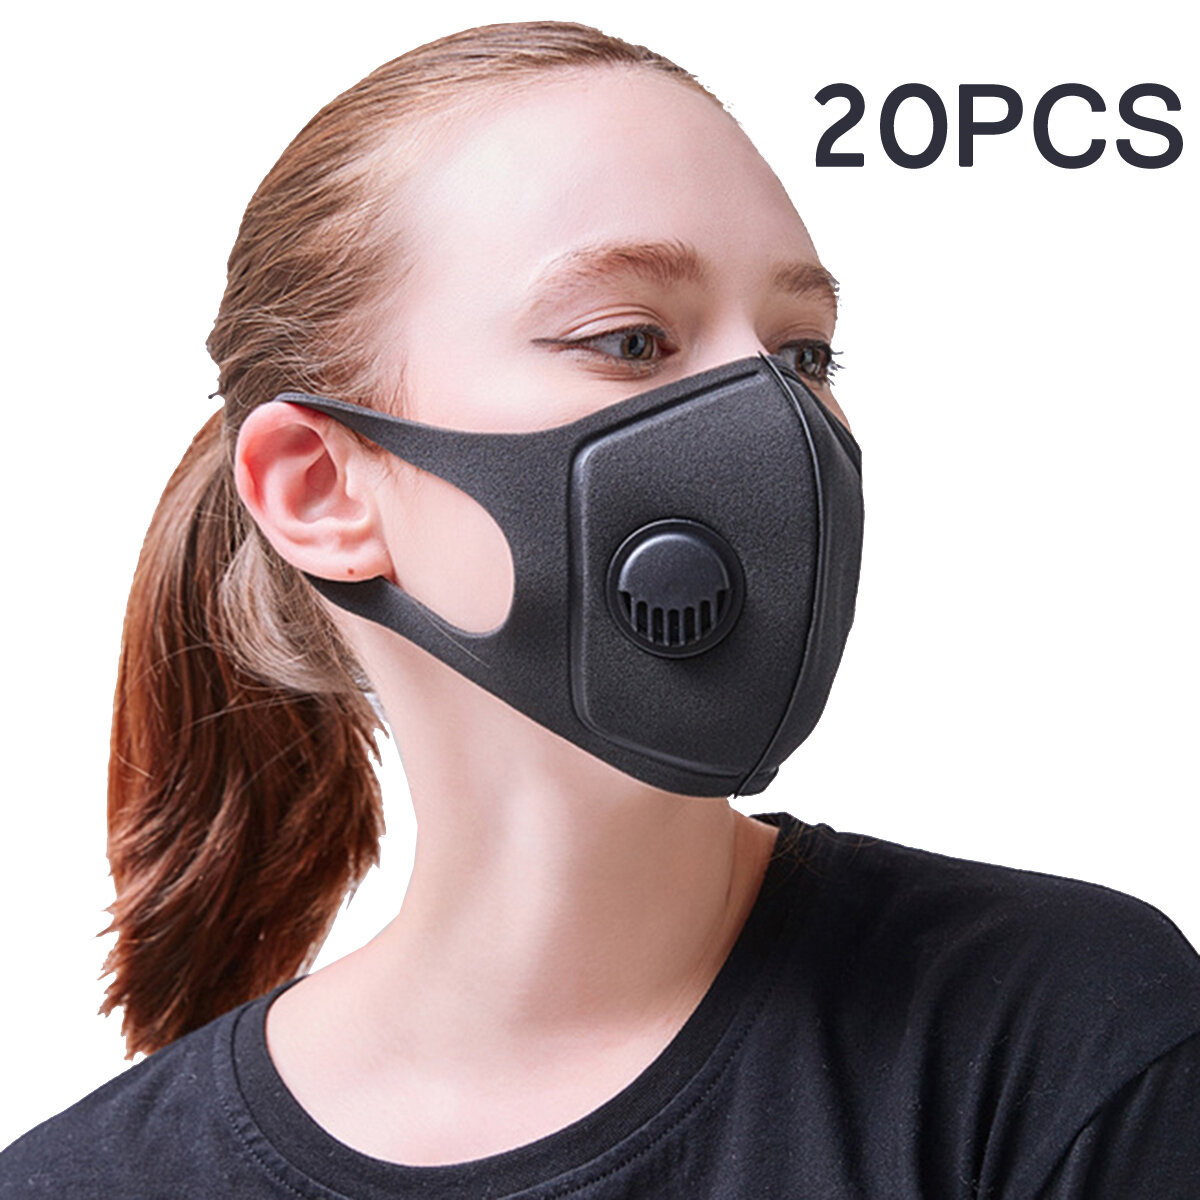 Image of 20PCS PM25 Anti Air Pollution Face Mask Breathable Activated Carbon Mouth Mask Camping Travel Cycling Mask